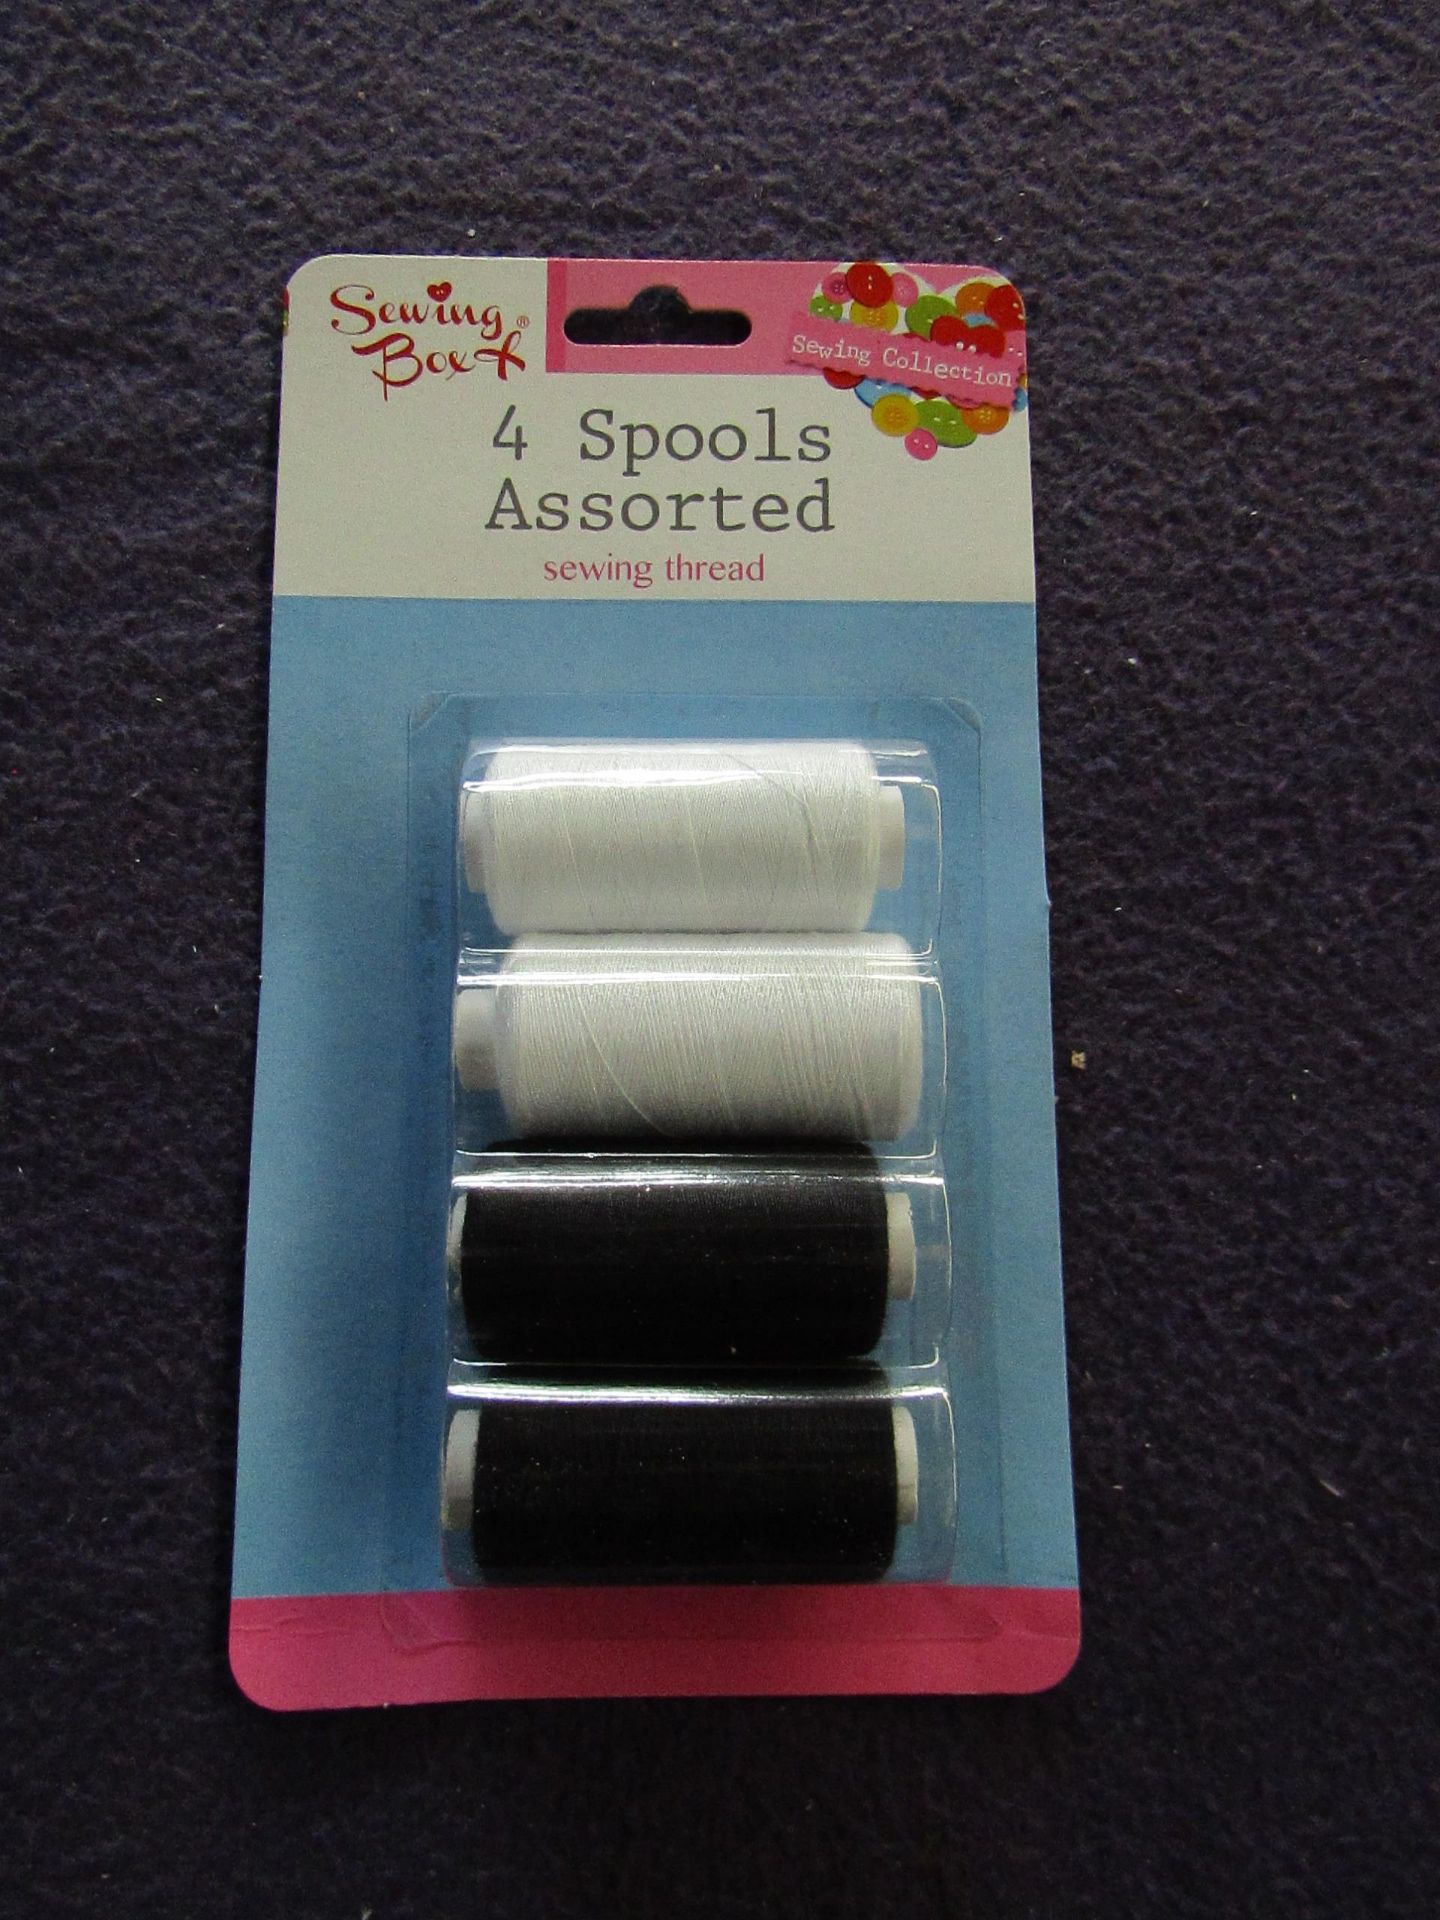 12x Sewing Box - Set of 4 Sewing Spools ( Assorted Colours ) - Unused & Boxed.